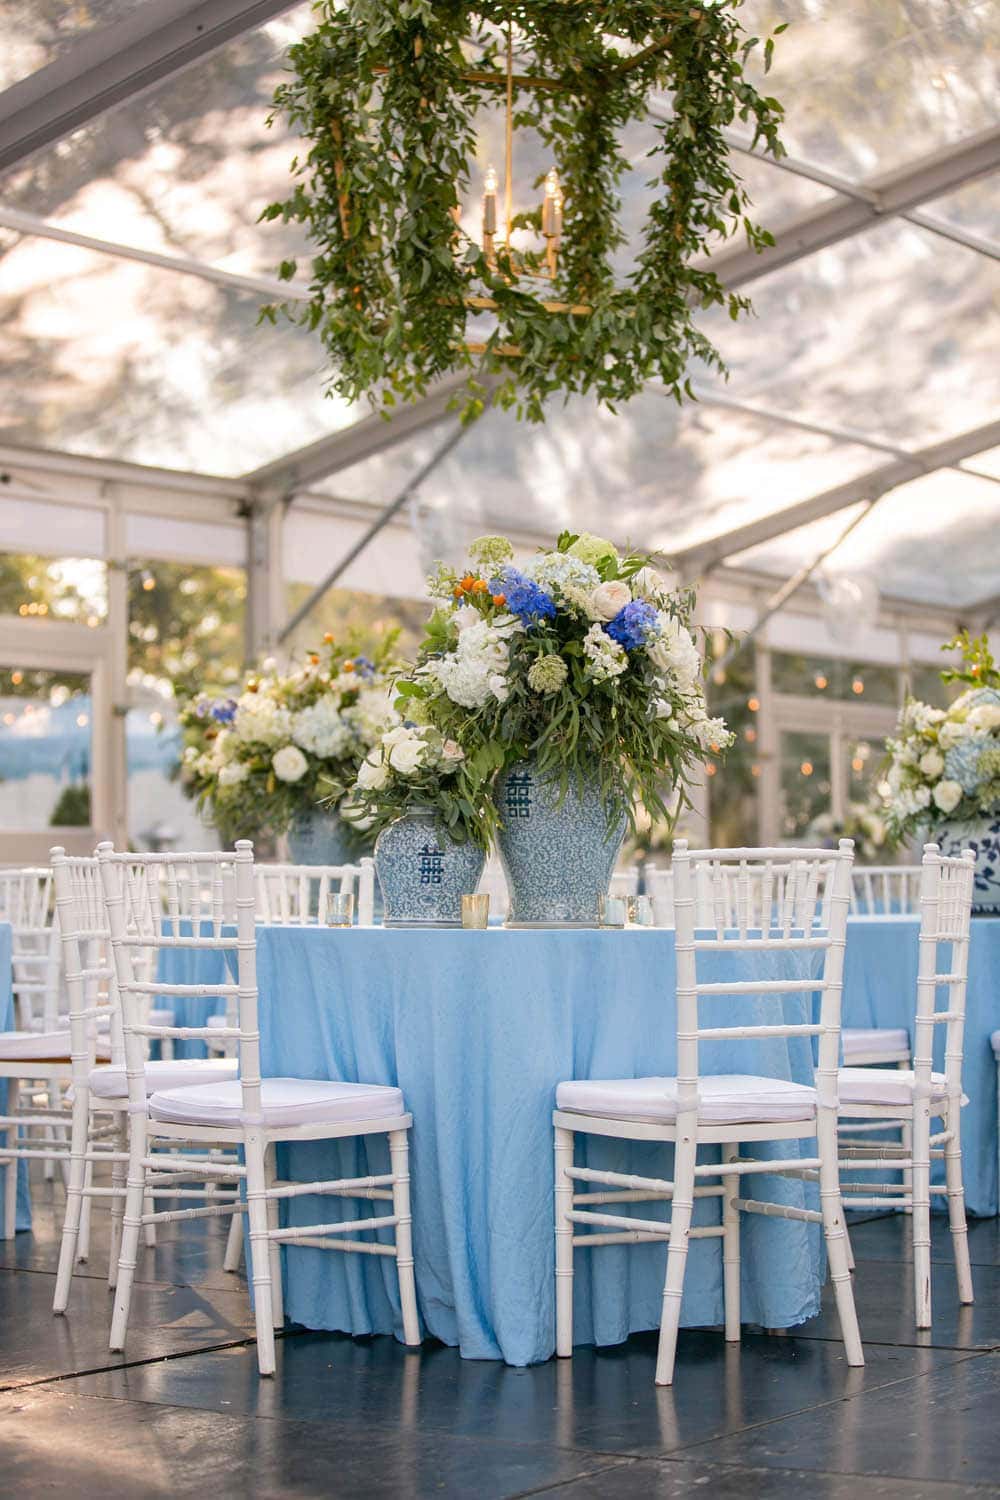 Wedding Venue with chairs and table